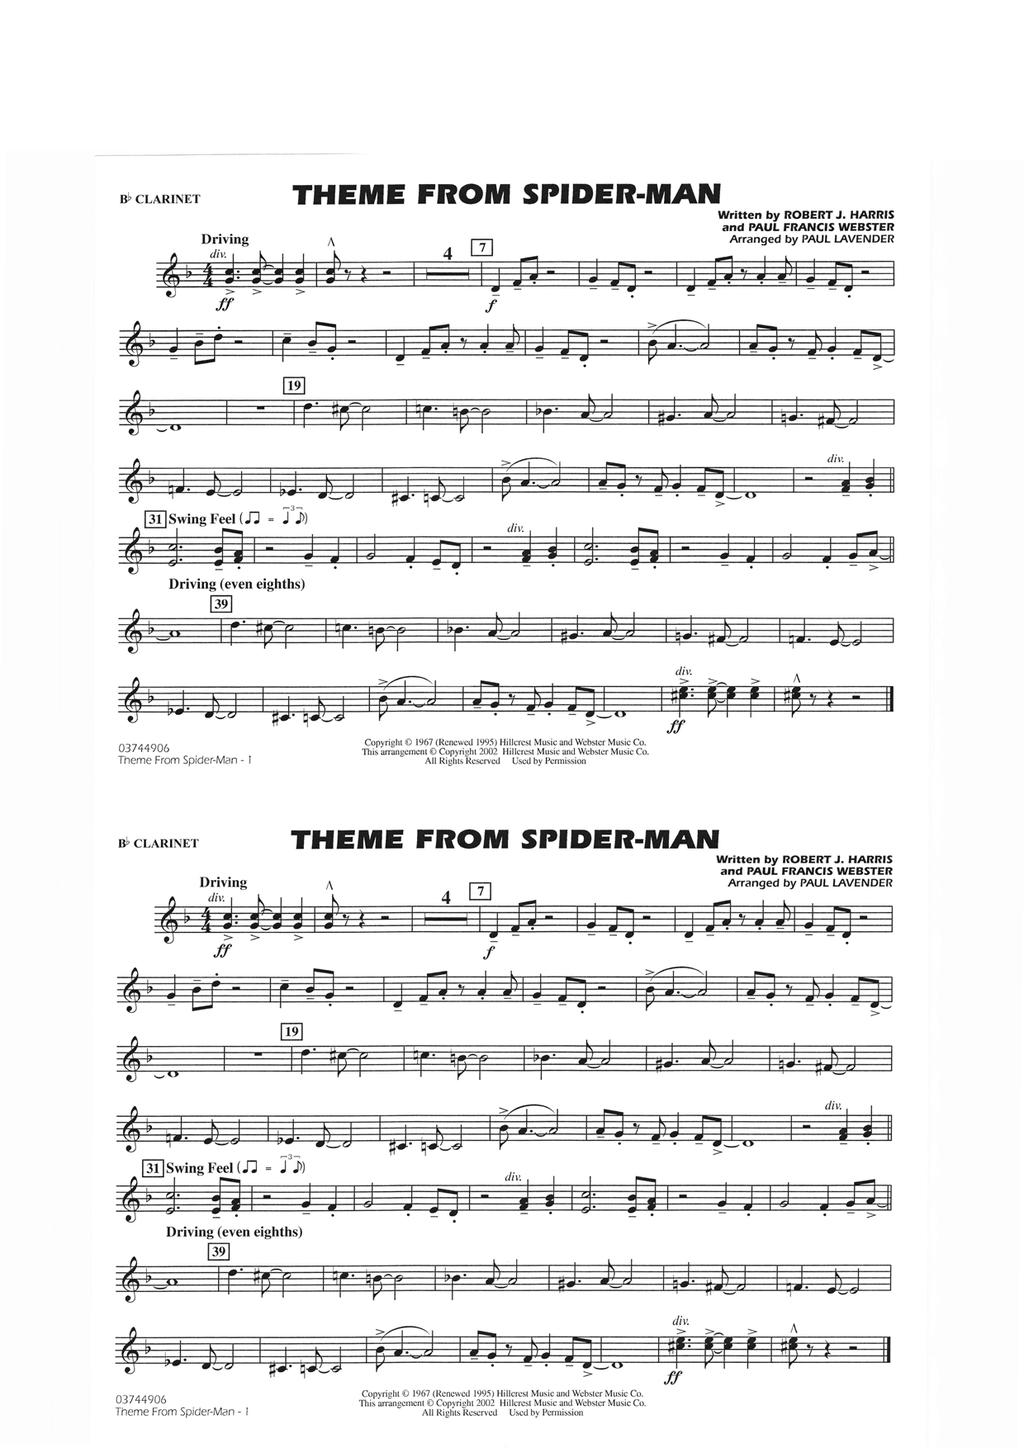 nb cu.rinet THEME FROIUI SPIDER.MAil and PAUI FRANCIS WEBSTER Arranged by PAUL LAVENDER ESwing FeeI (I -3- = J)) Copyright @ 1967 (Renewed 1995) Hillcrest Music and Webster Music Co.